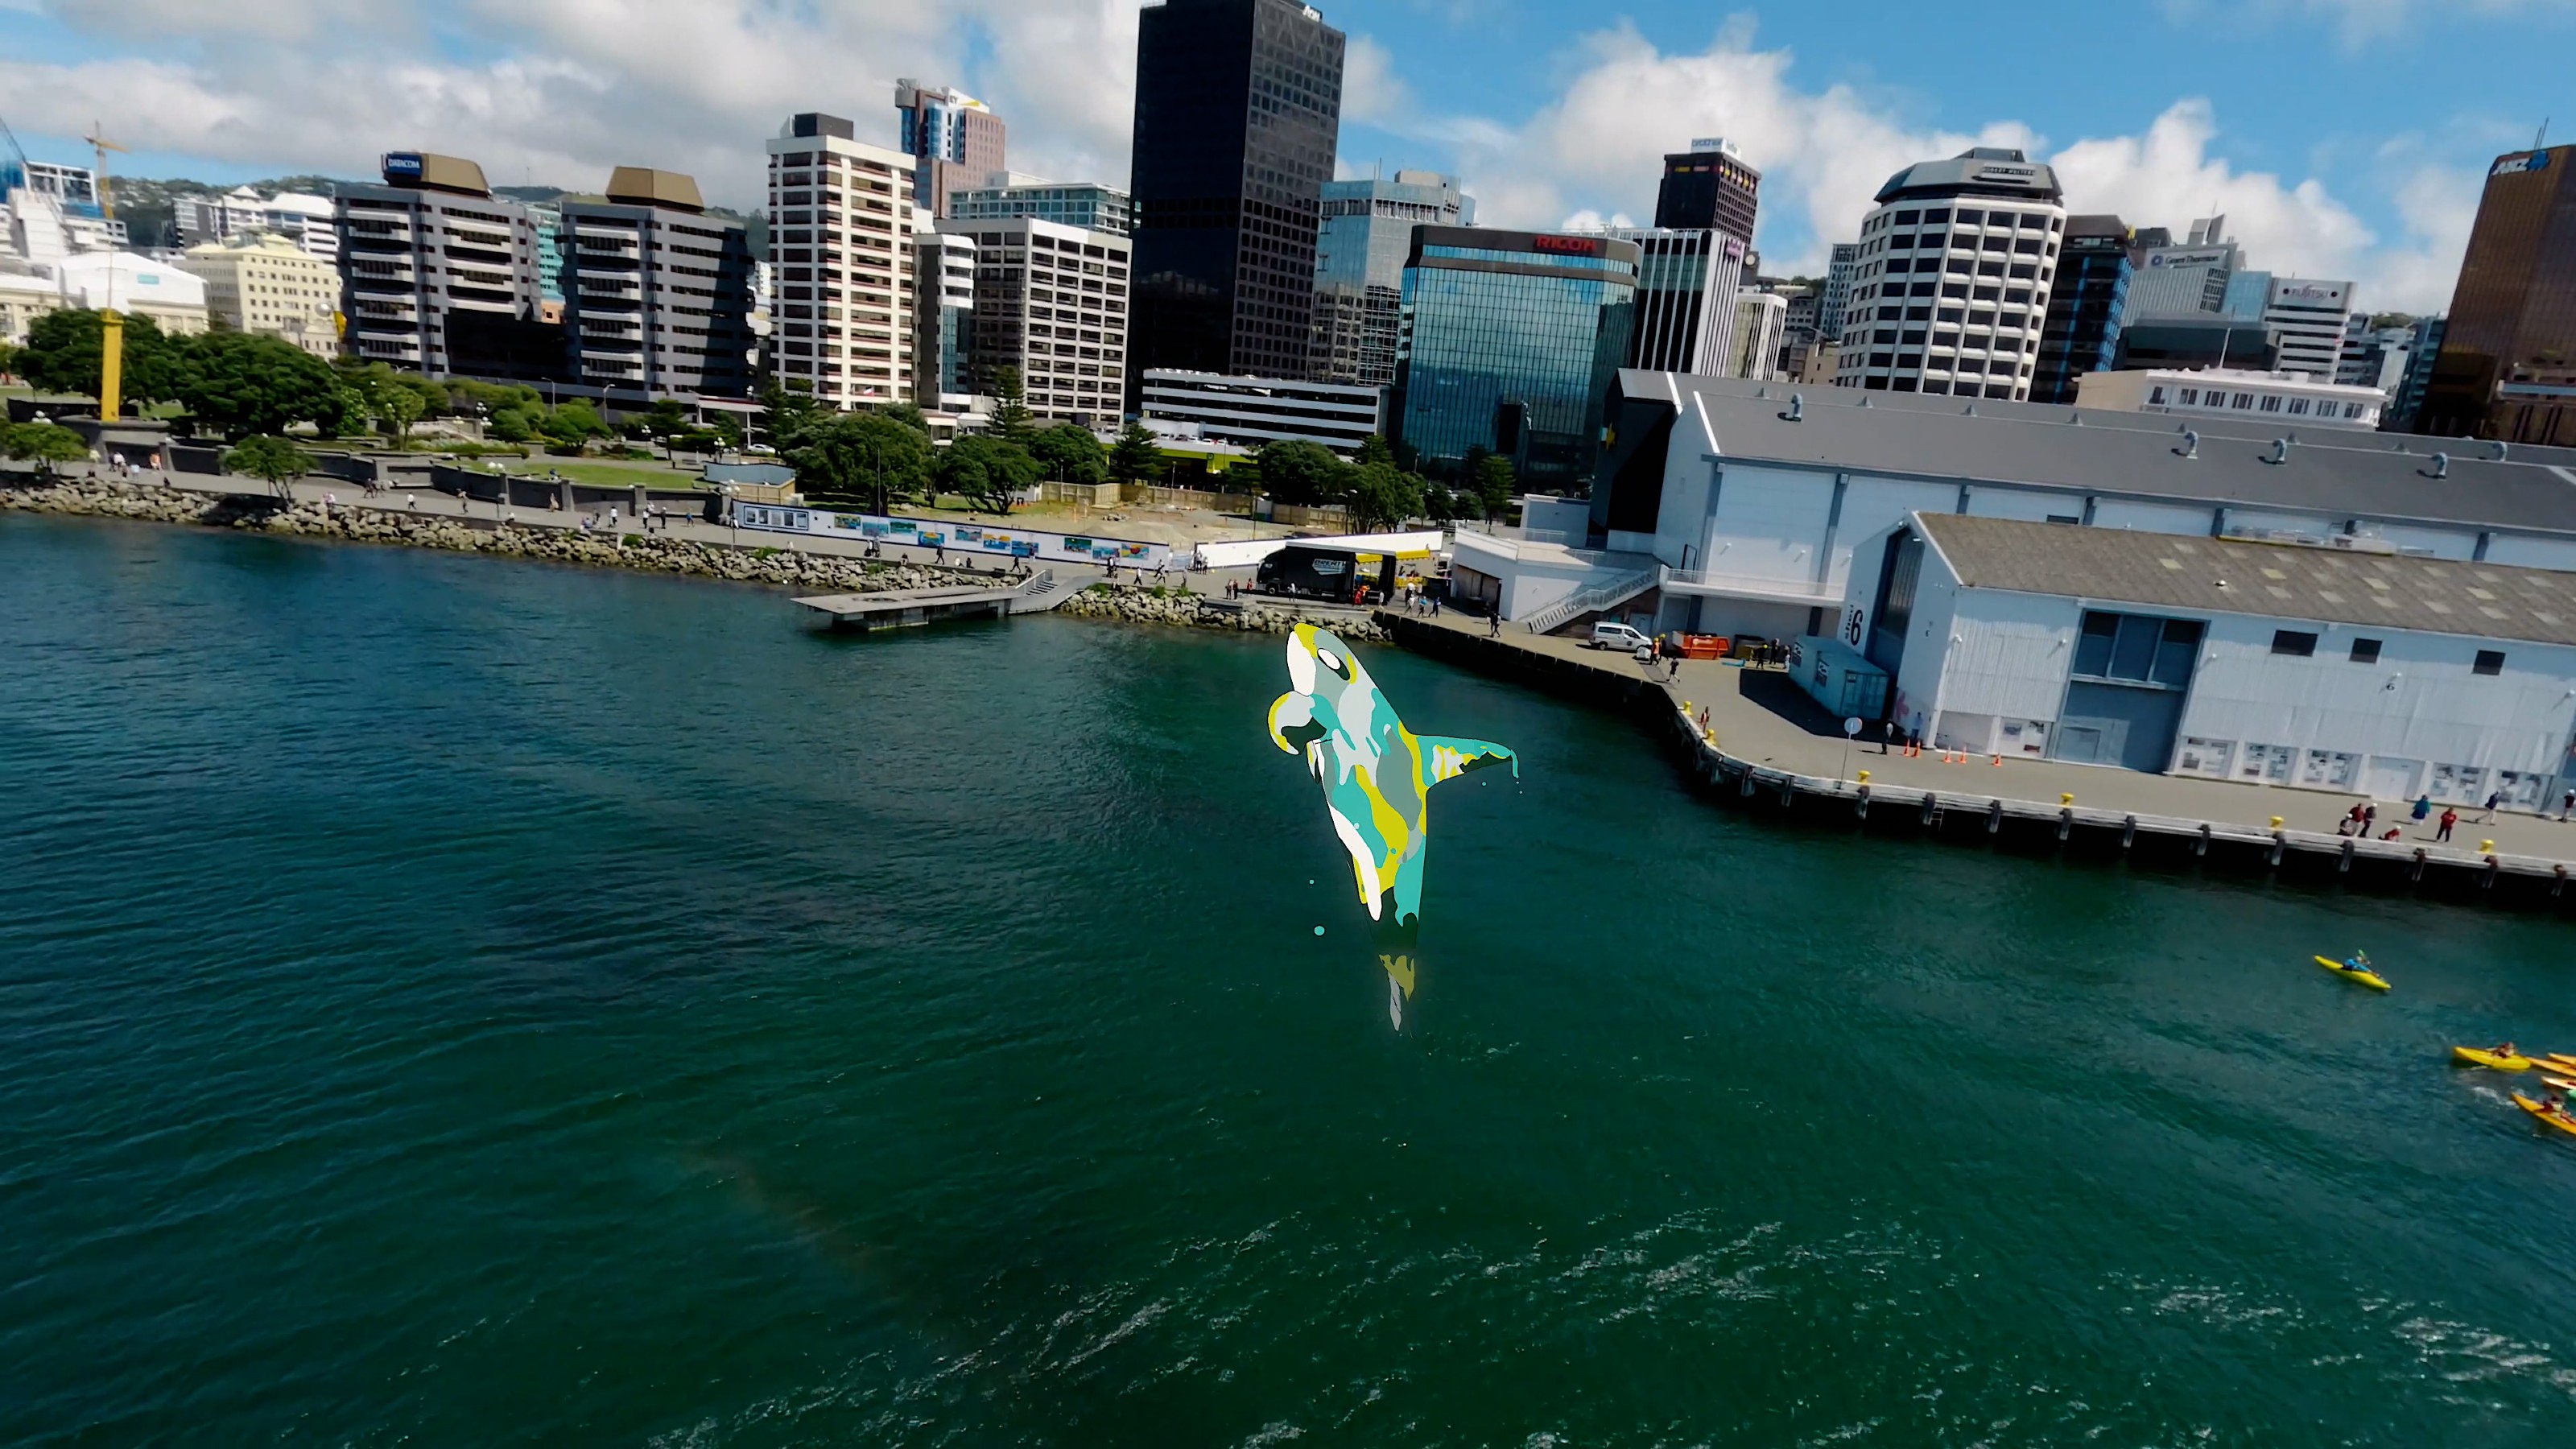 Photograph of Wellington harbour with a grey, green and white illustrated orca jumping through the water.